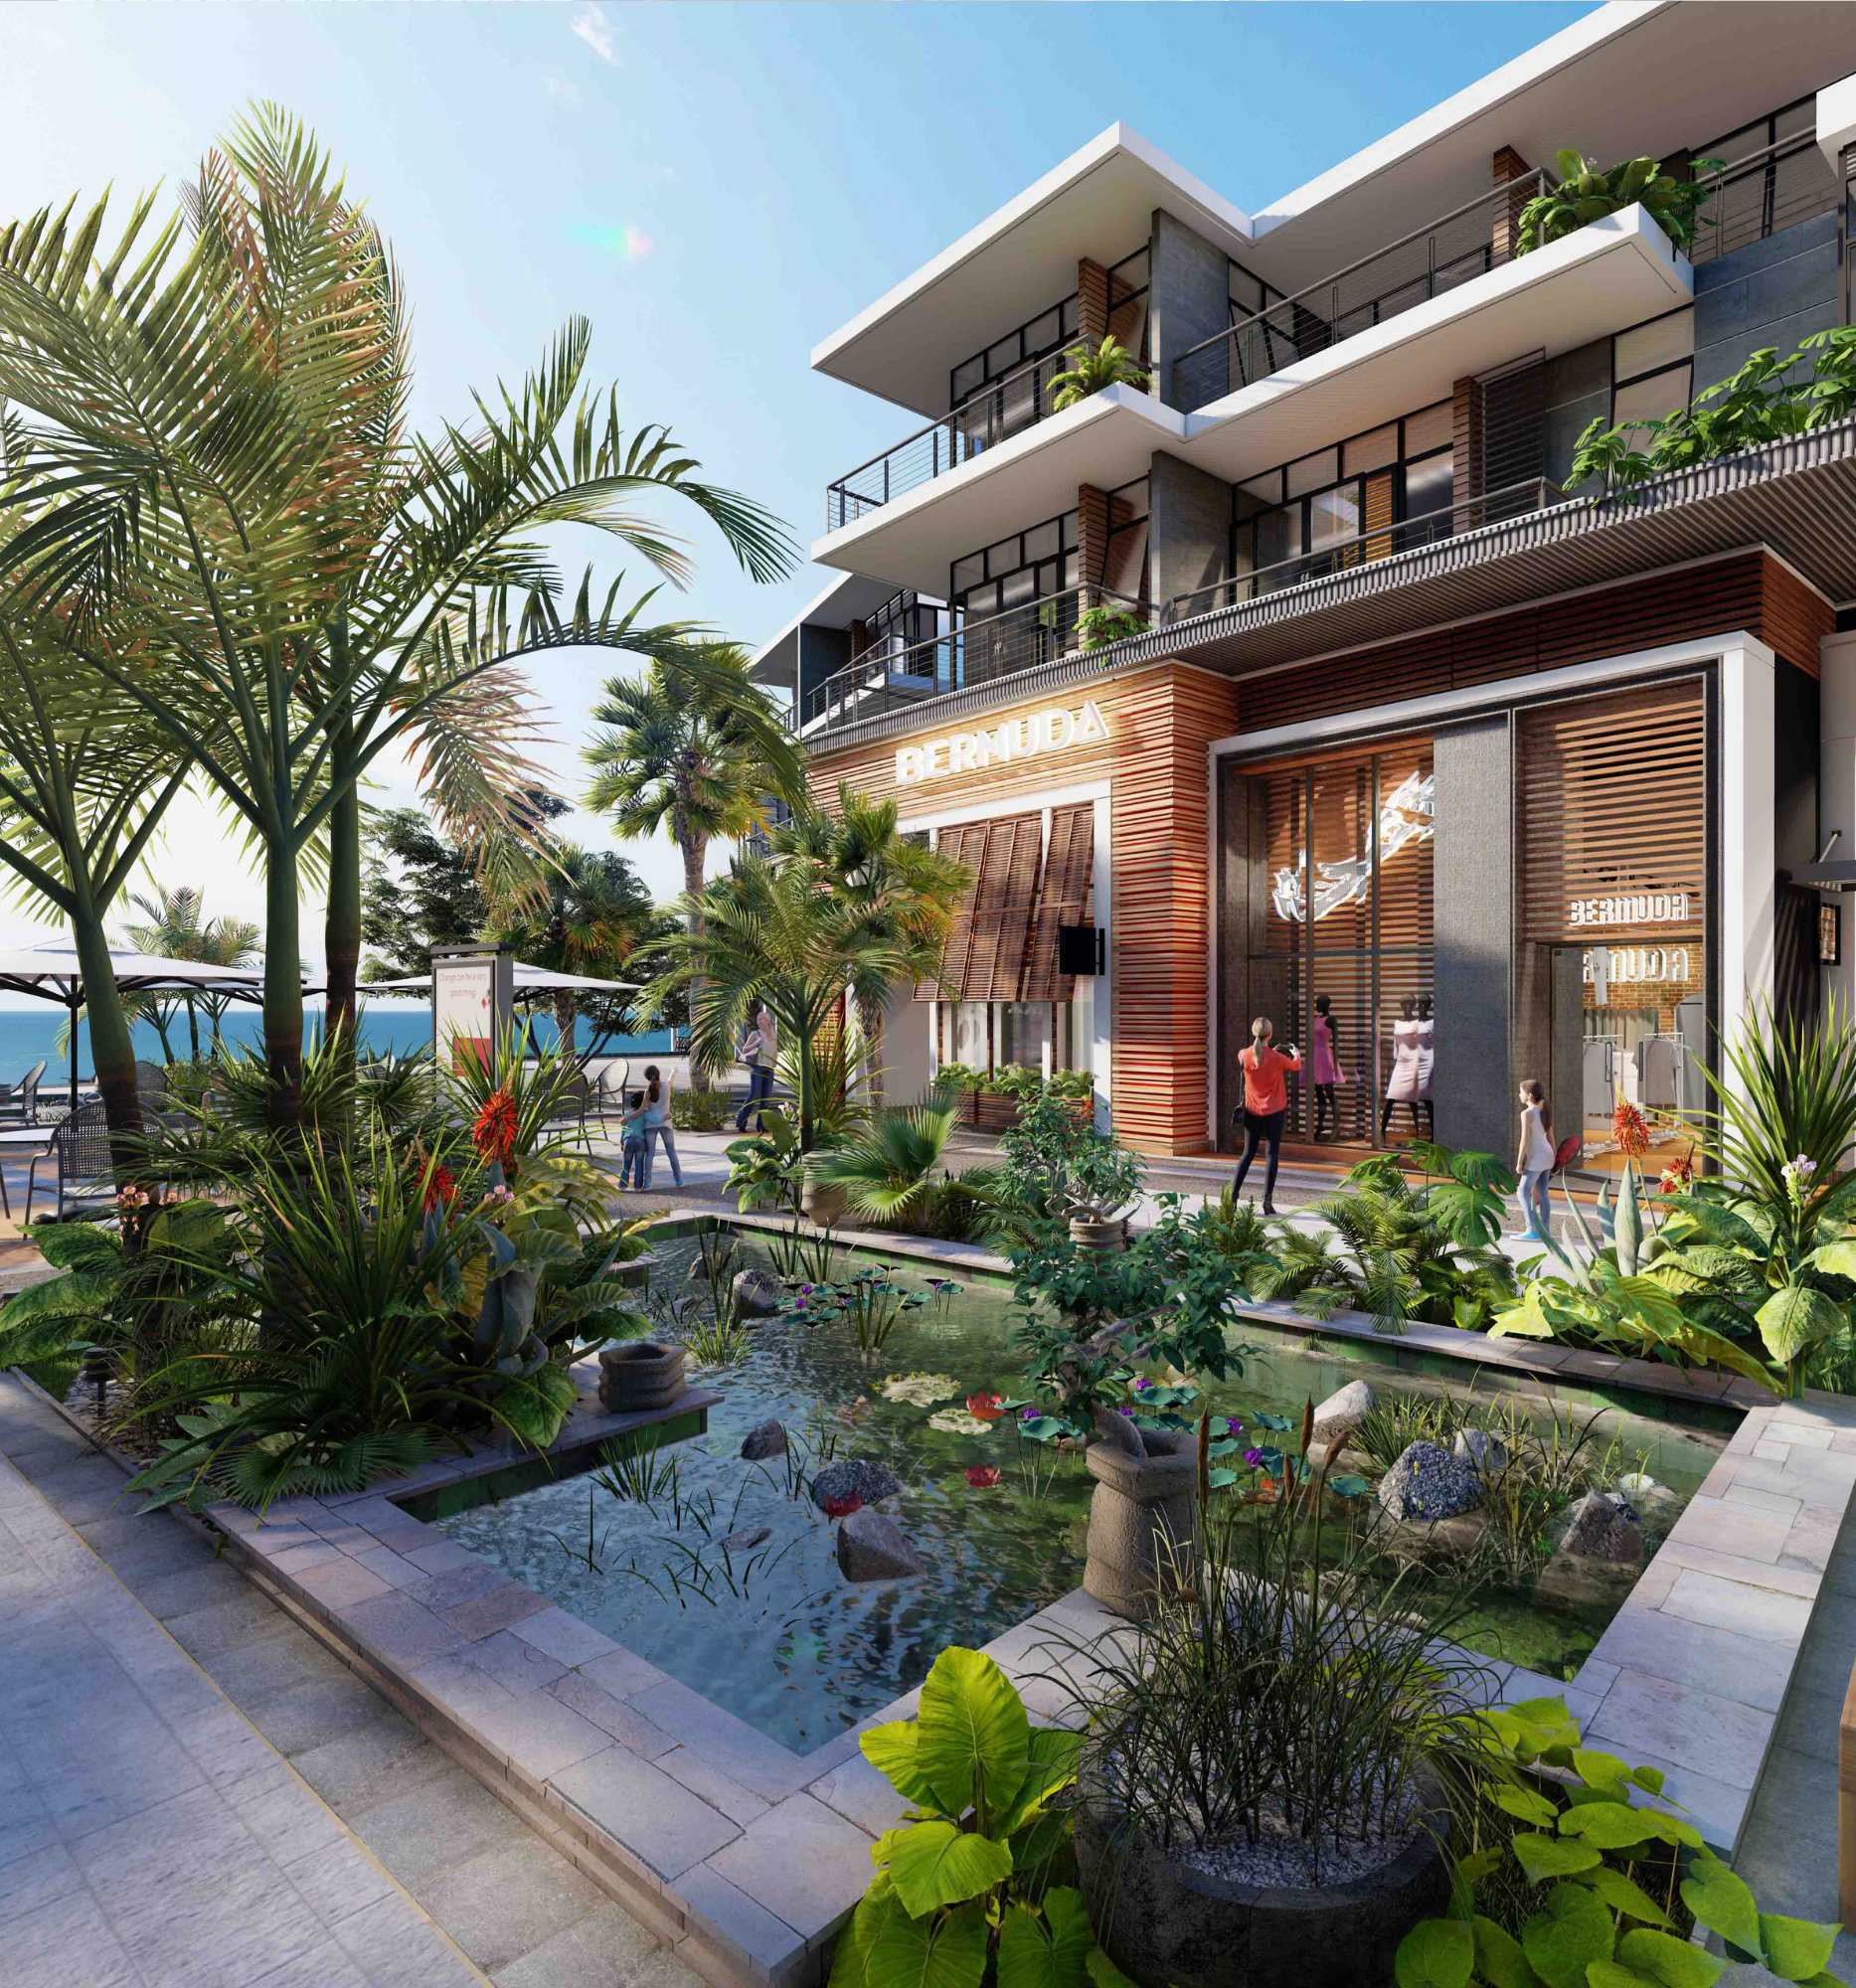 rendering of the bermuda redevelopment project